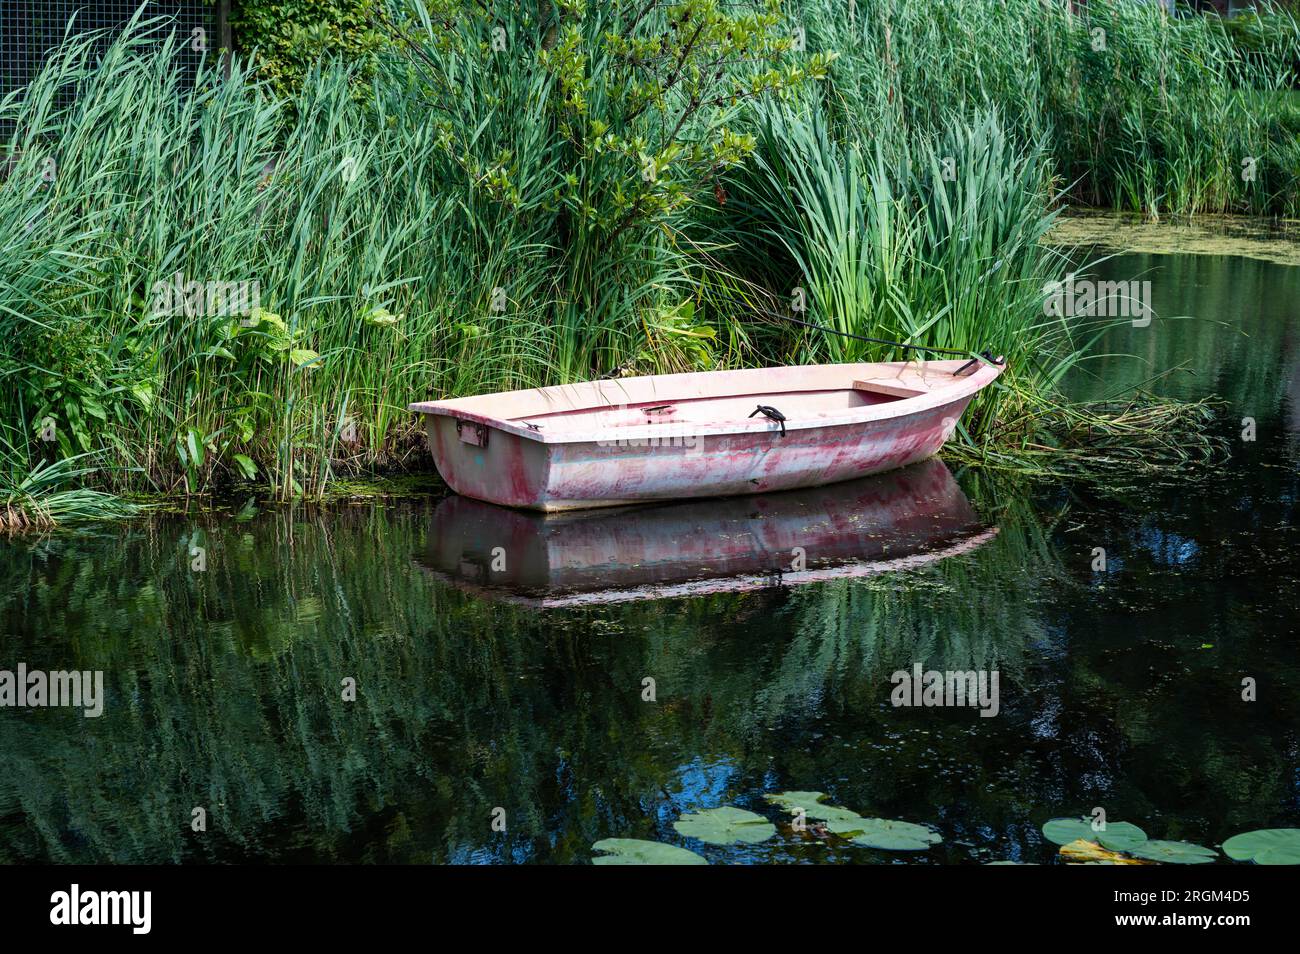 Small vessel reflecting in a creek with green water reeds, Barendrecht, South Holland, The Netherlands Stock Photo